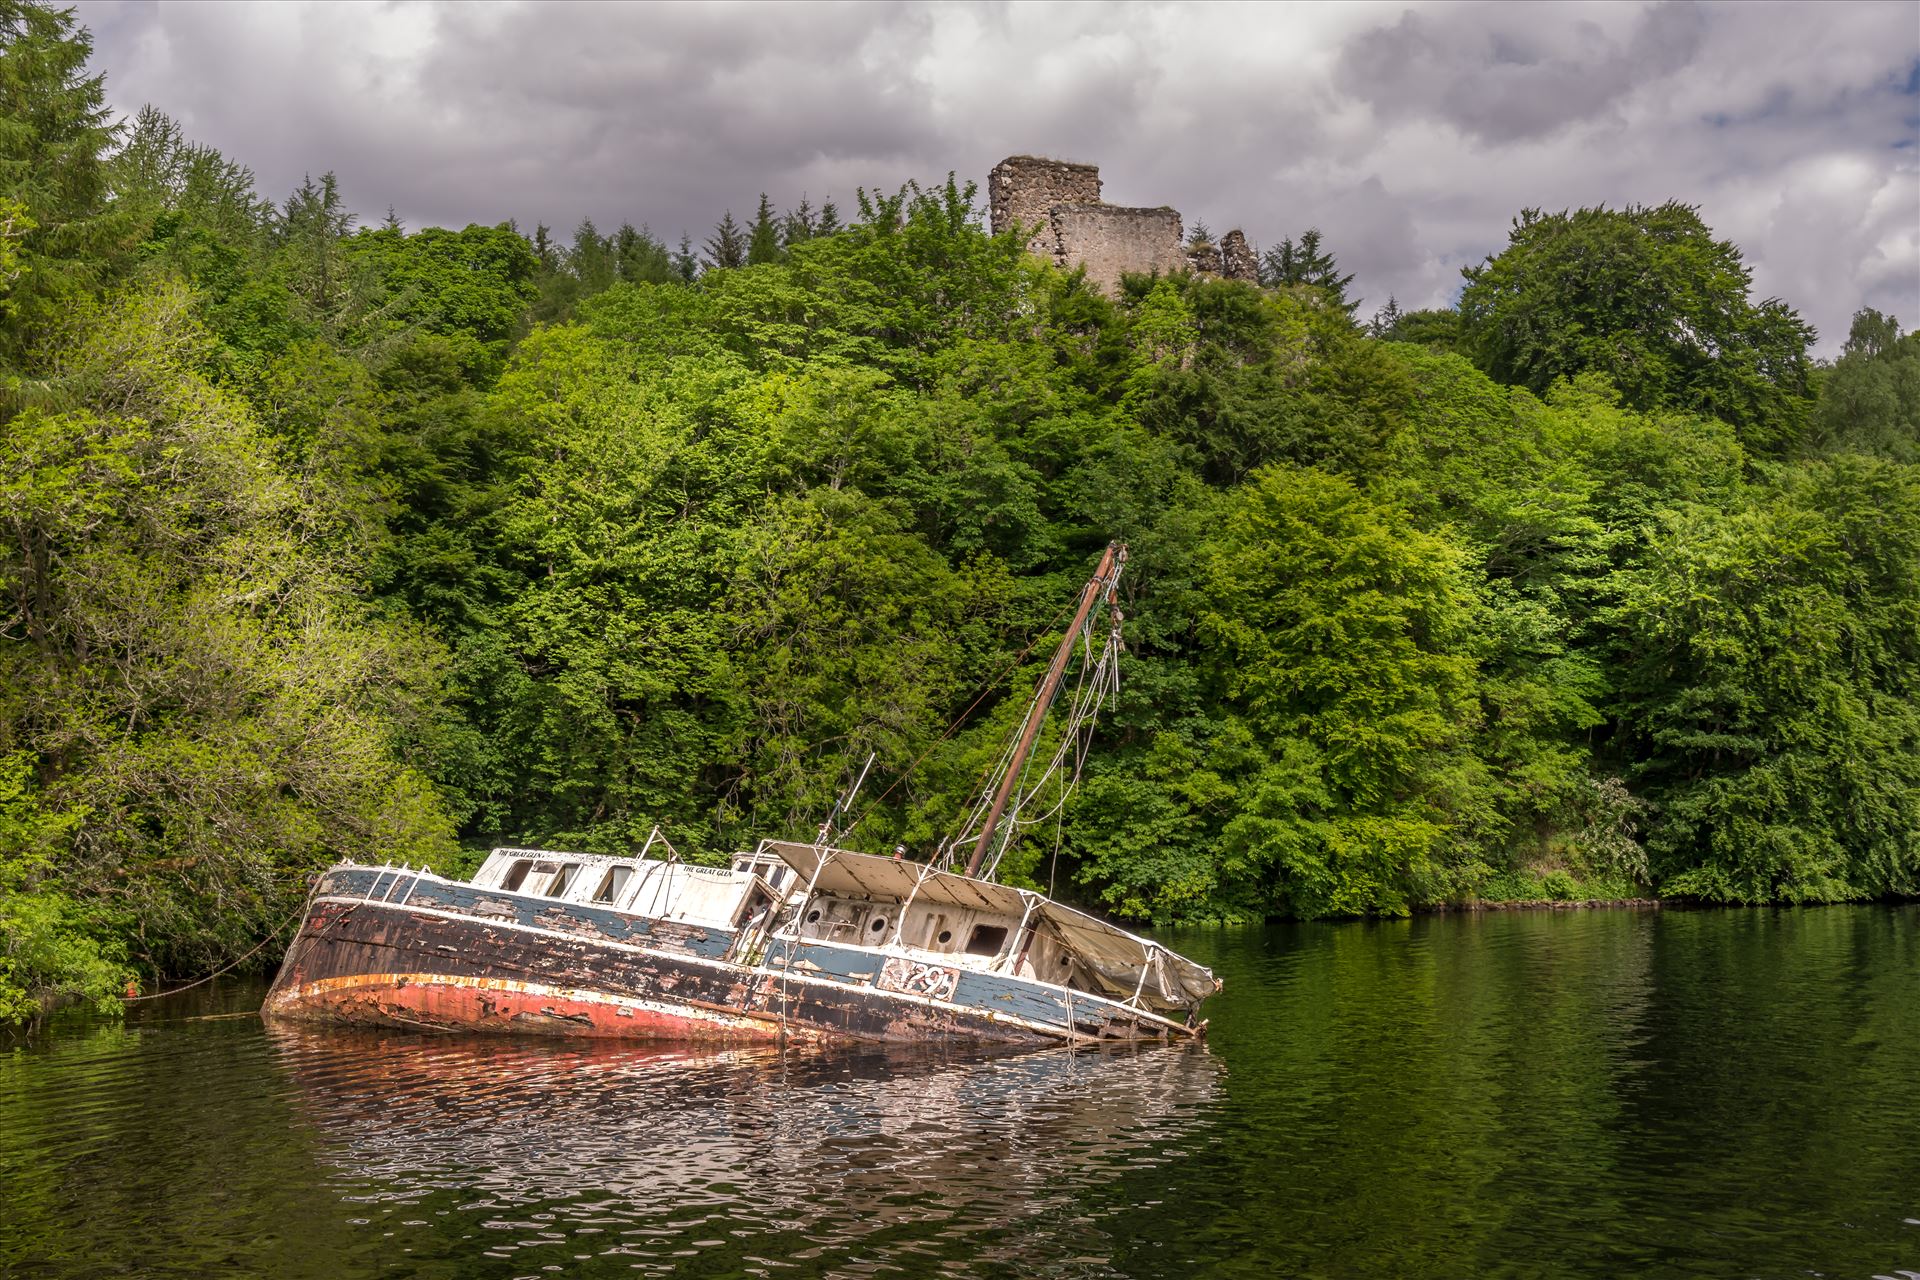 Invergarry Castle & the Eala Bhan The Eala Bhan shipwreck overlooked by Invergarry Castle on Loch Oich, part of the Caladonian Canal. by philreay